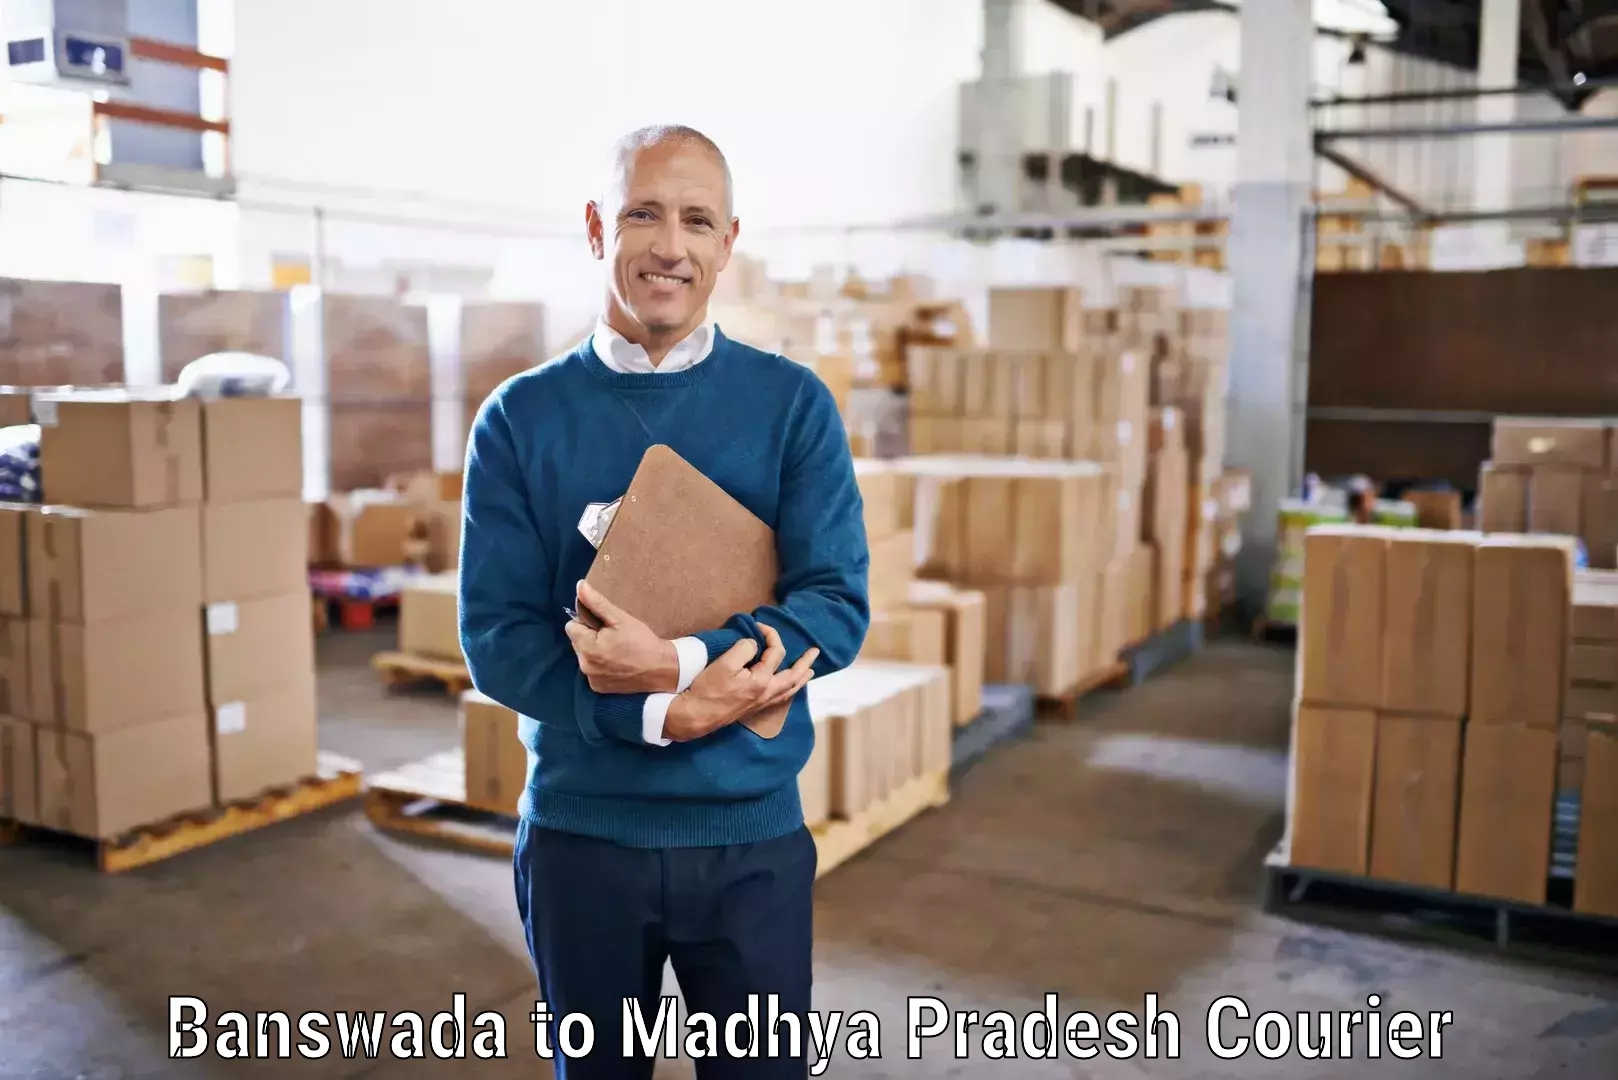 Cost-effective courier options Banswada to IIIT Bhopal